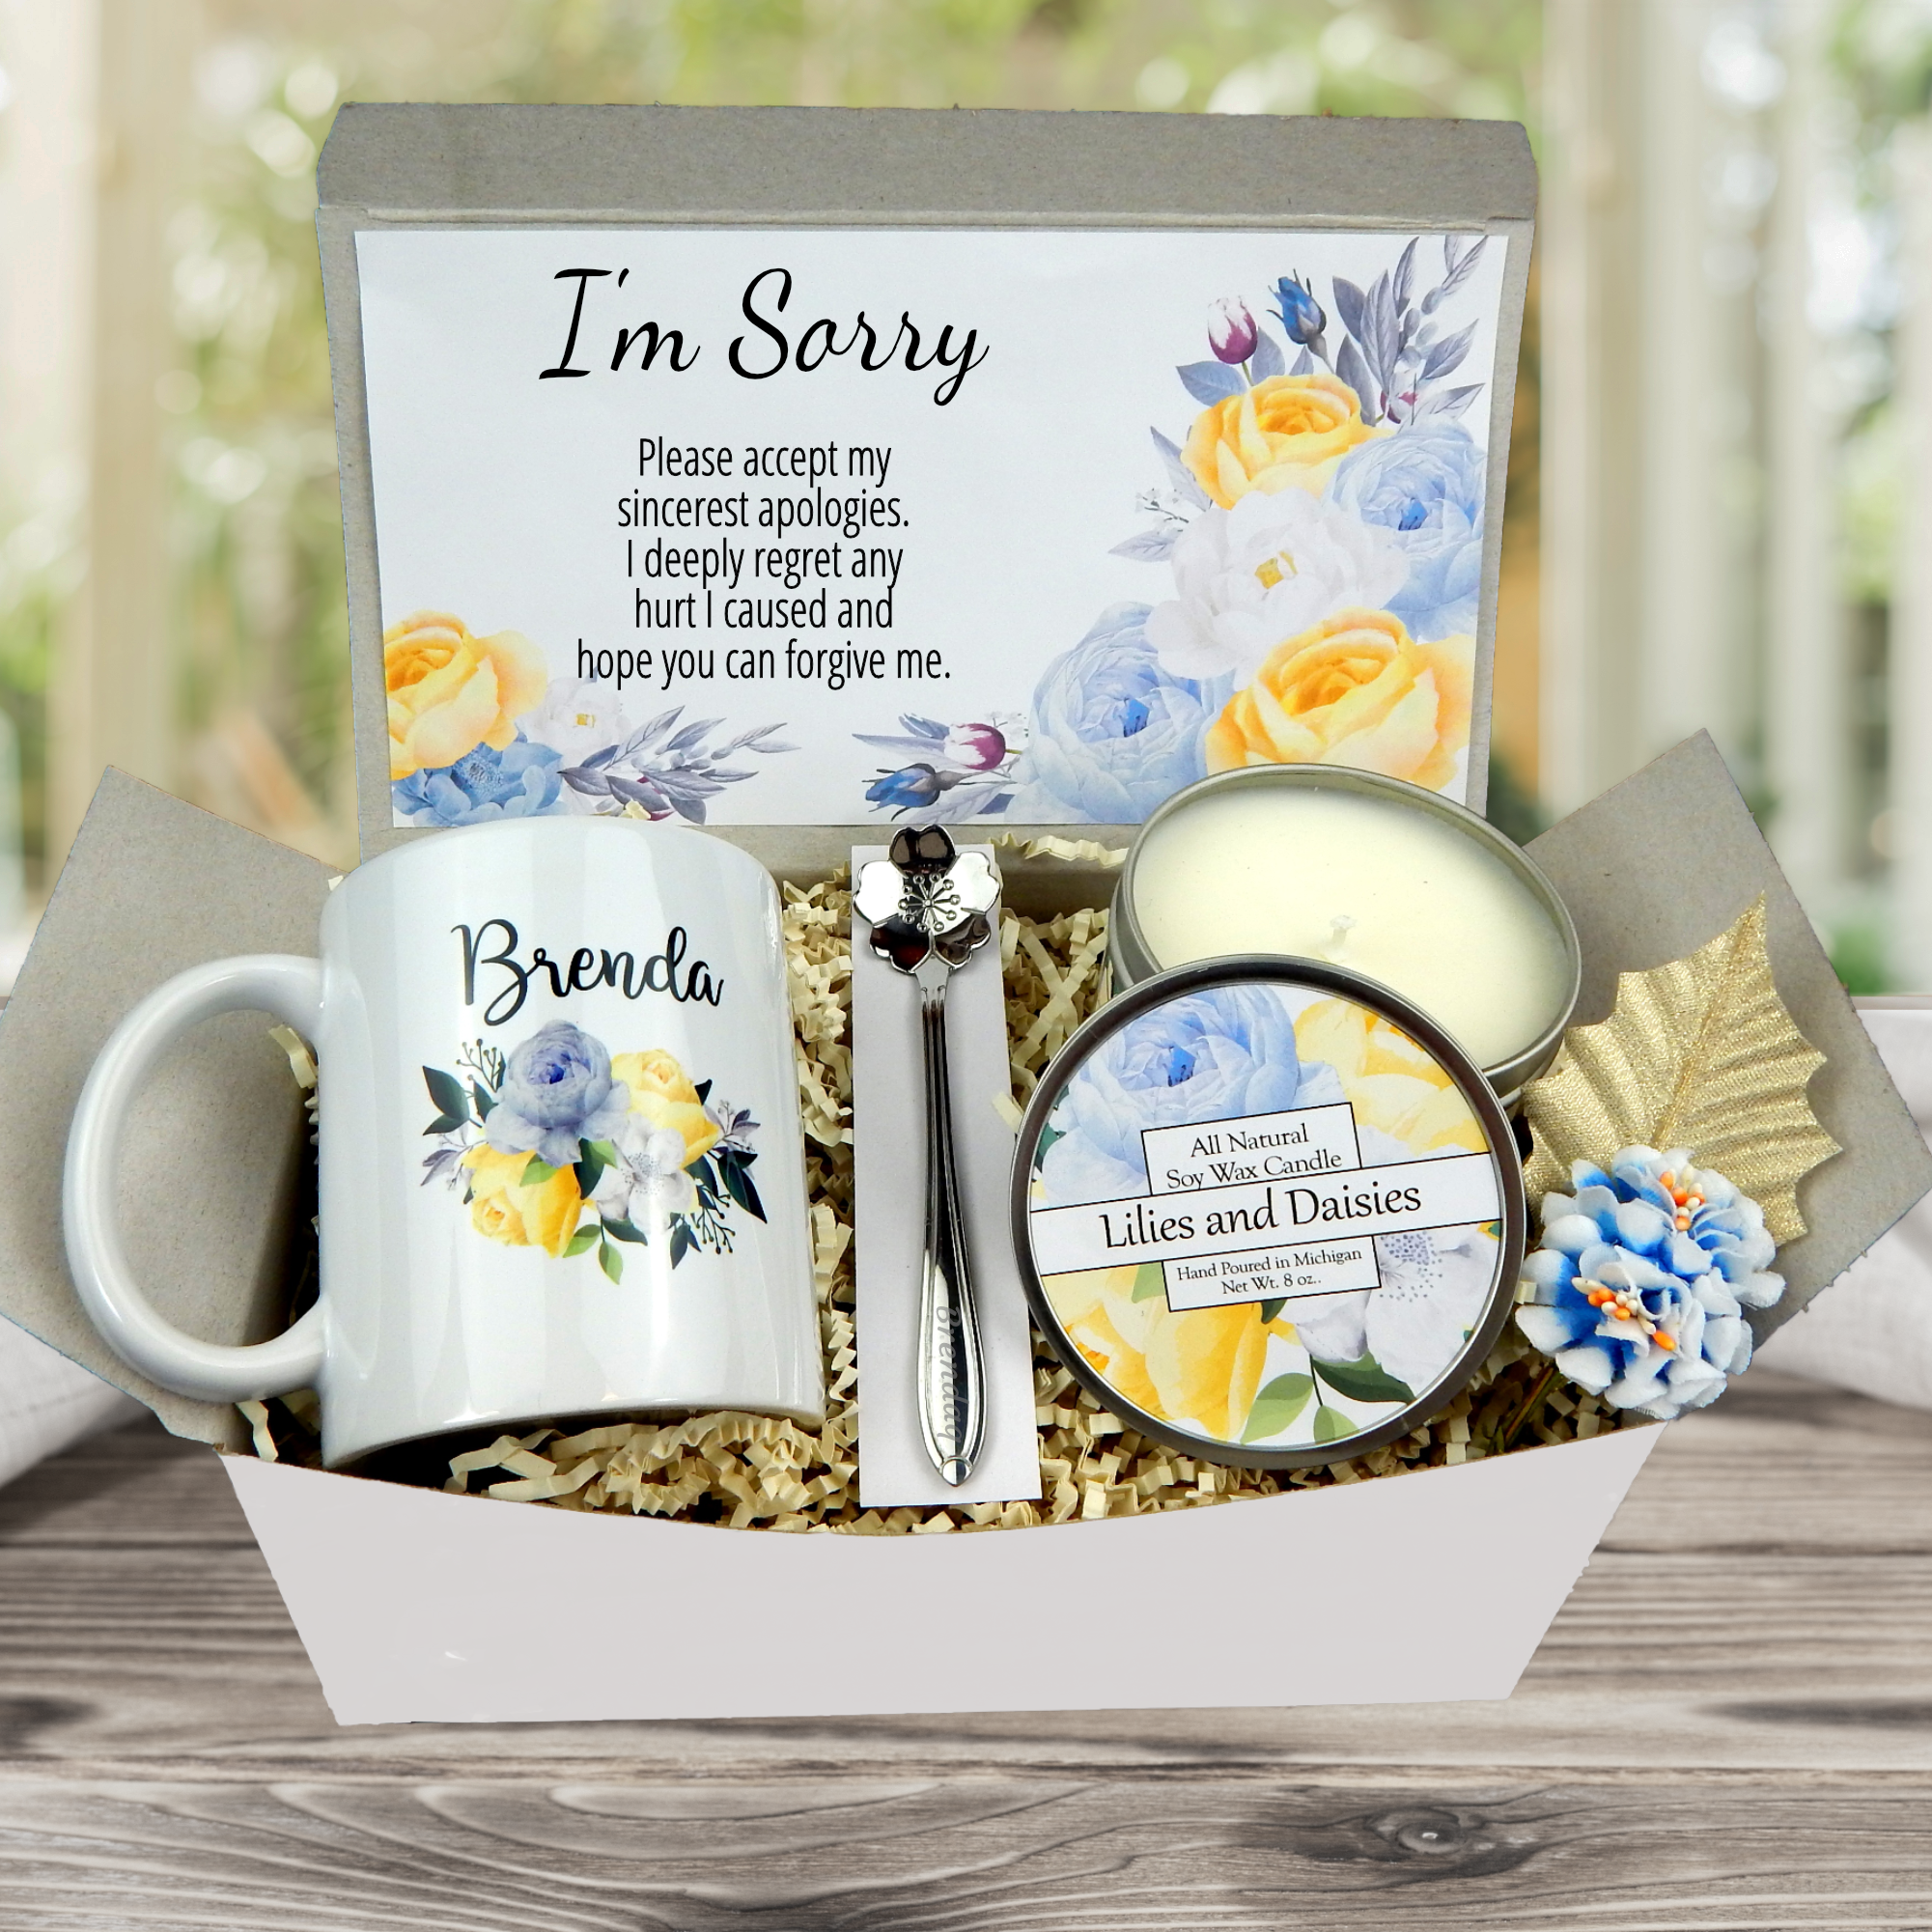 40 Easy and Creative Ways to Say I'm Sorry | Im sorry gifts, Apology gifts, Sorry  gifts